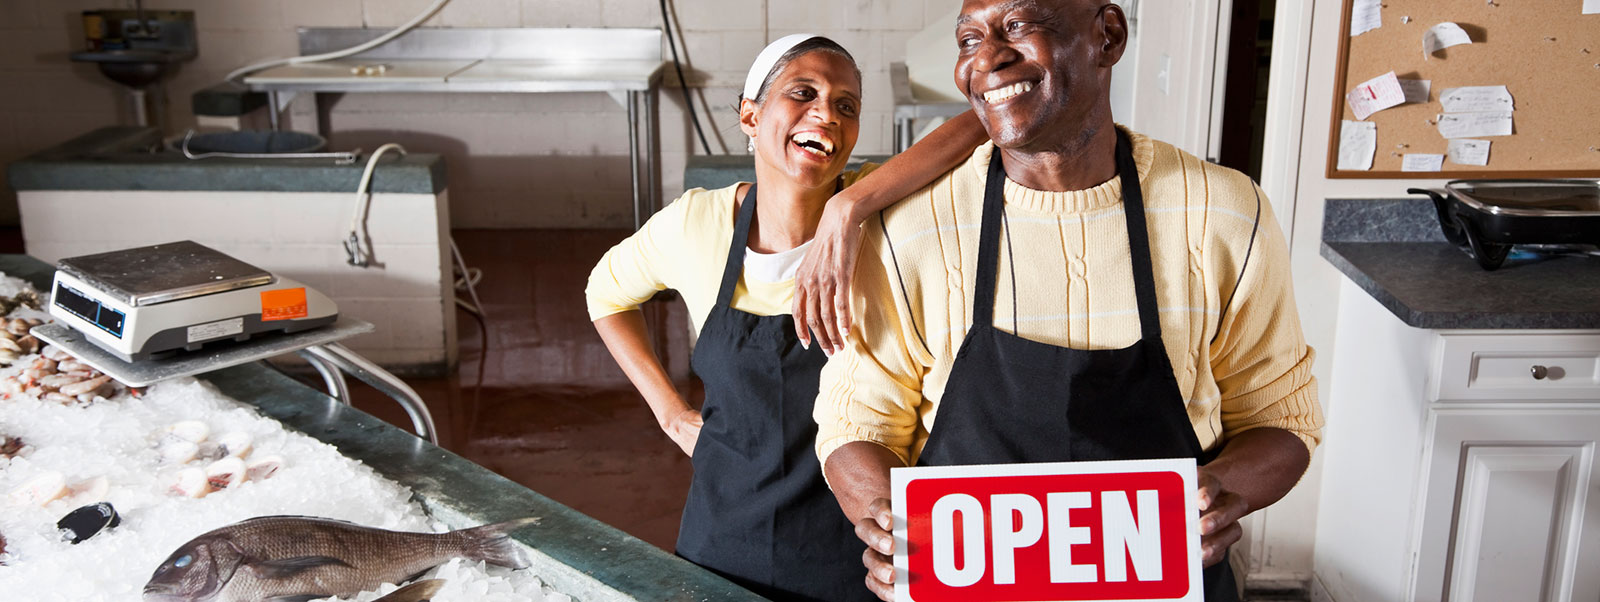 Husband and wife business owners in store with open sign